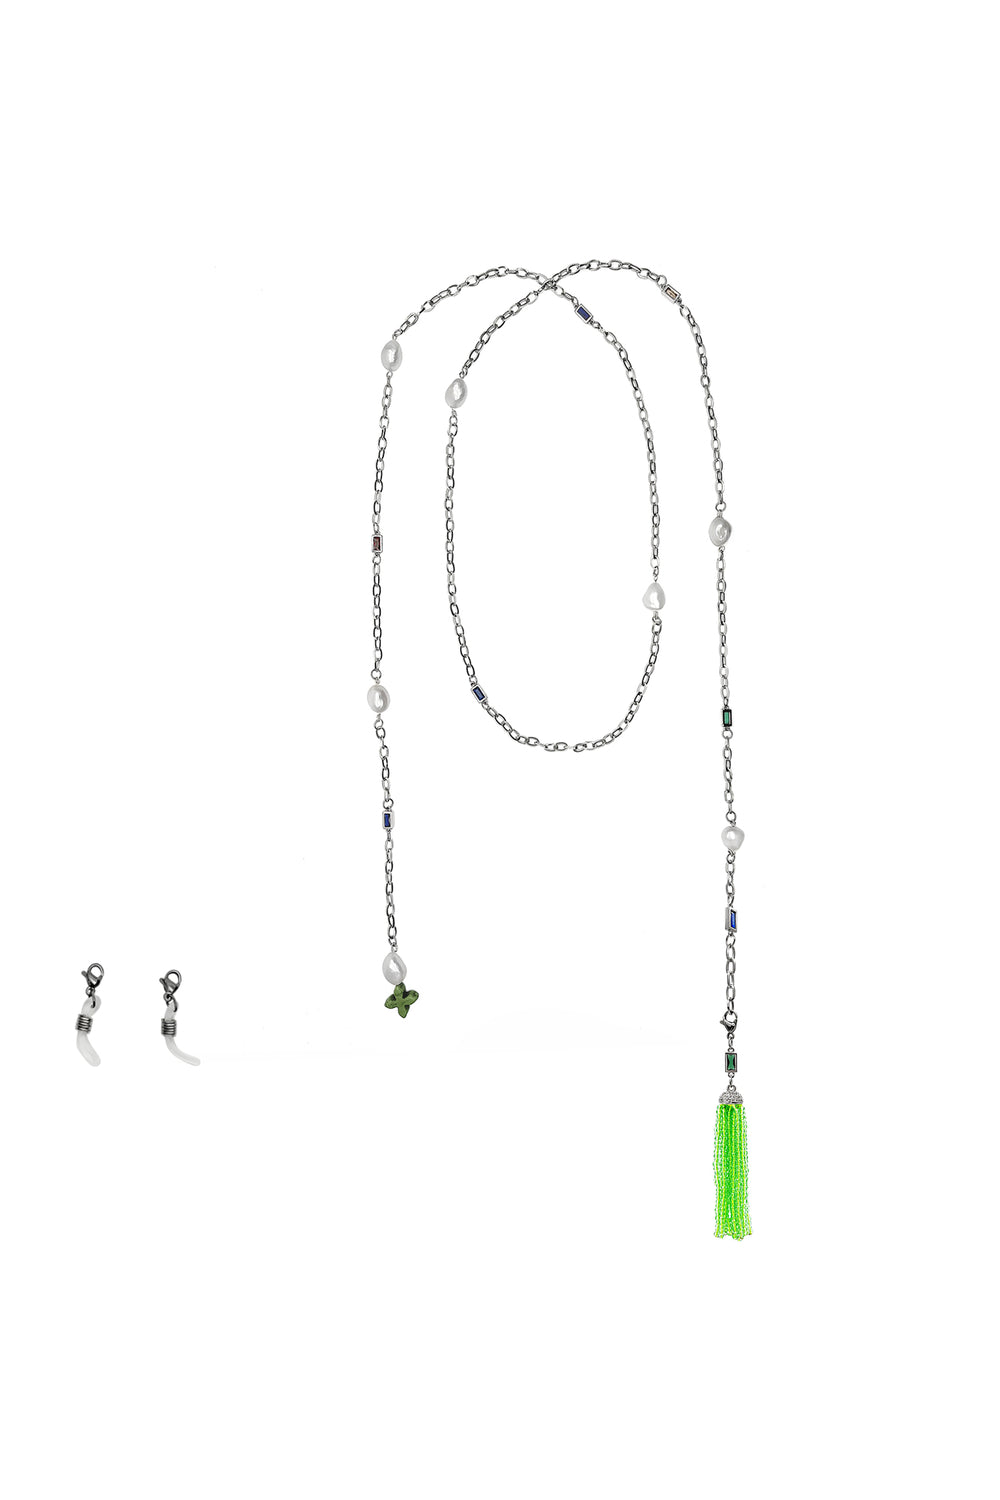 Amova Green Tassel Chain with Natural Pearls